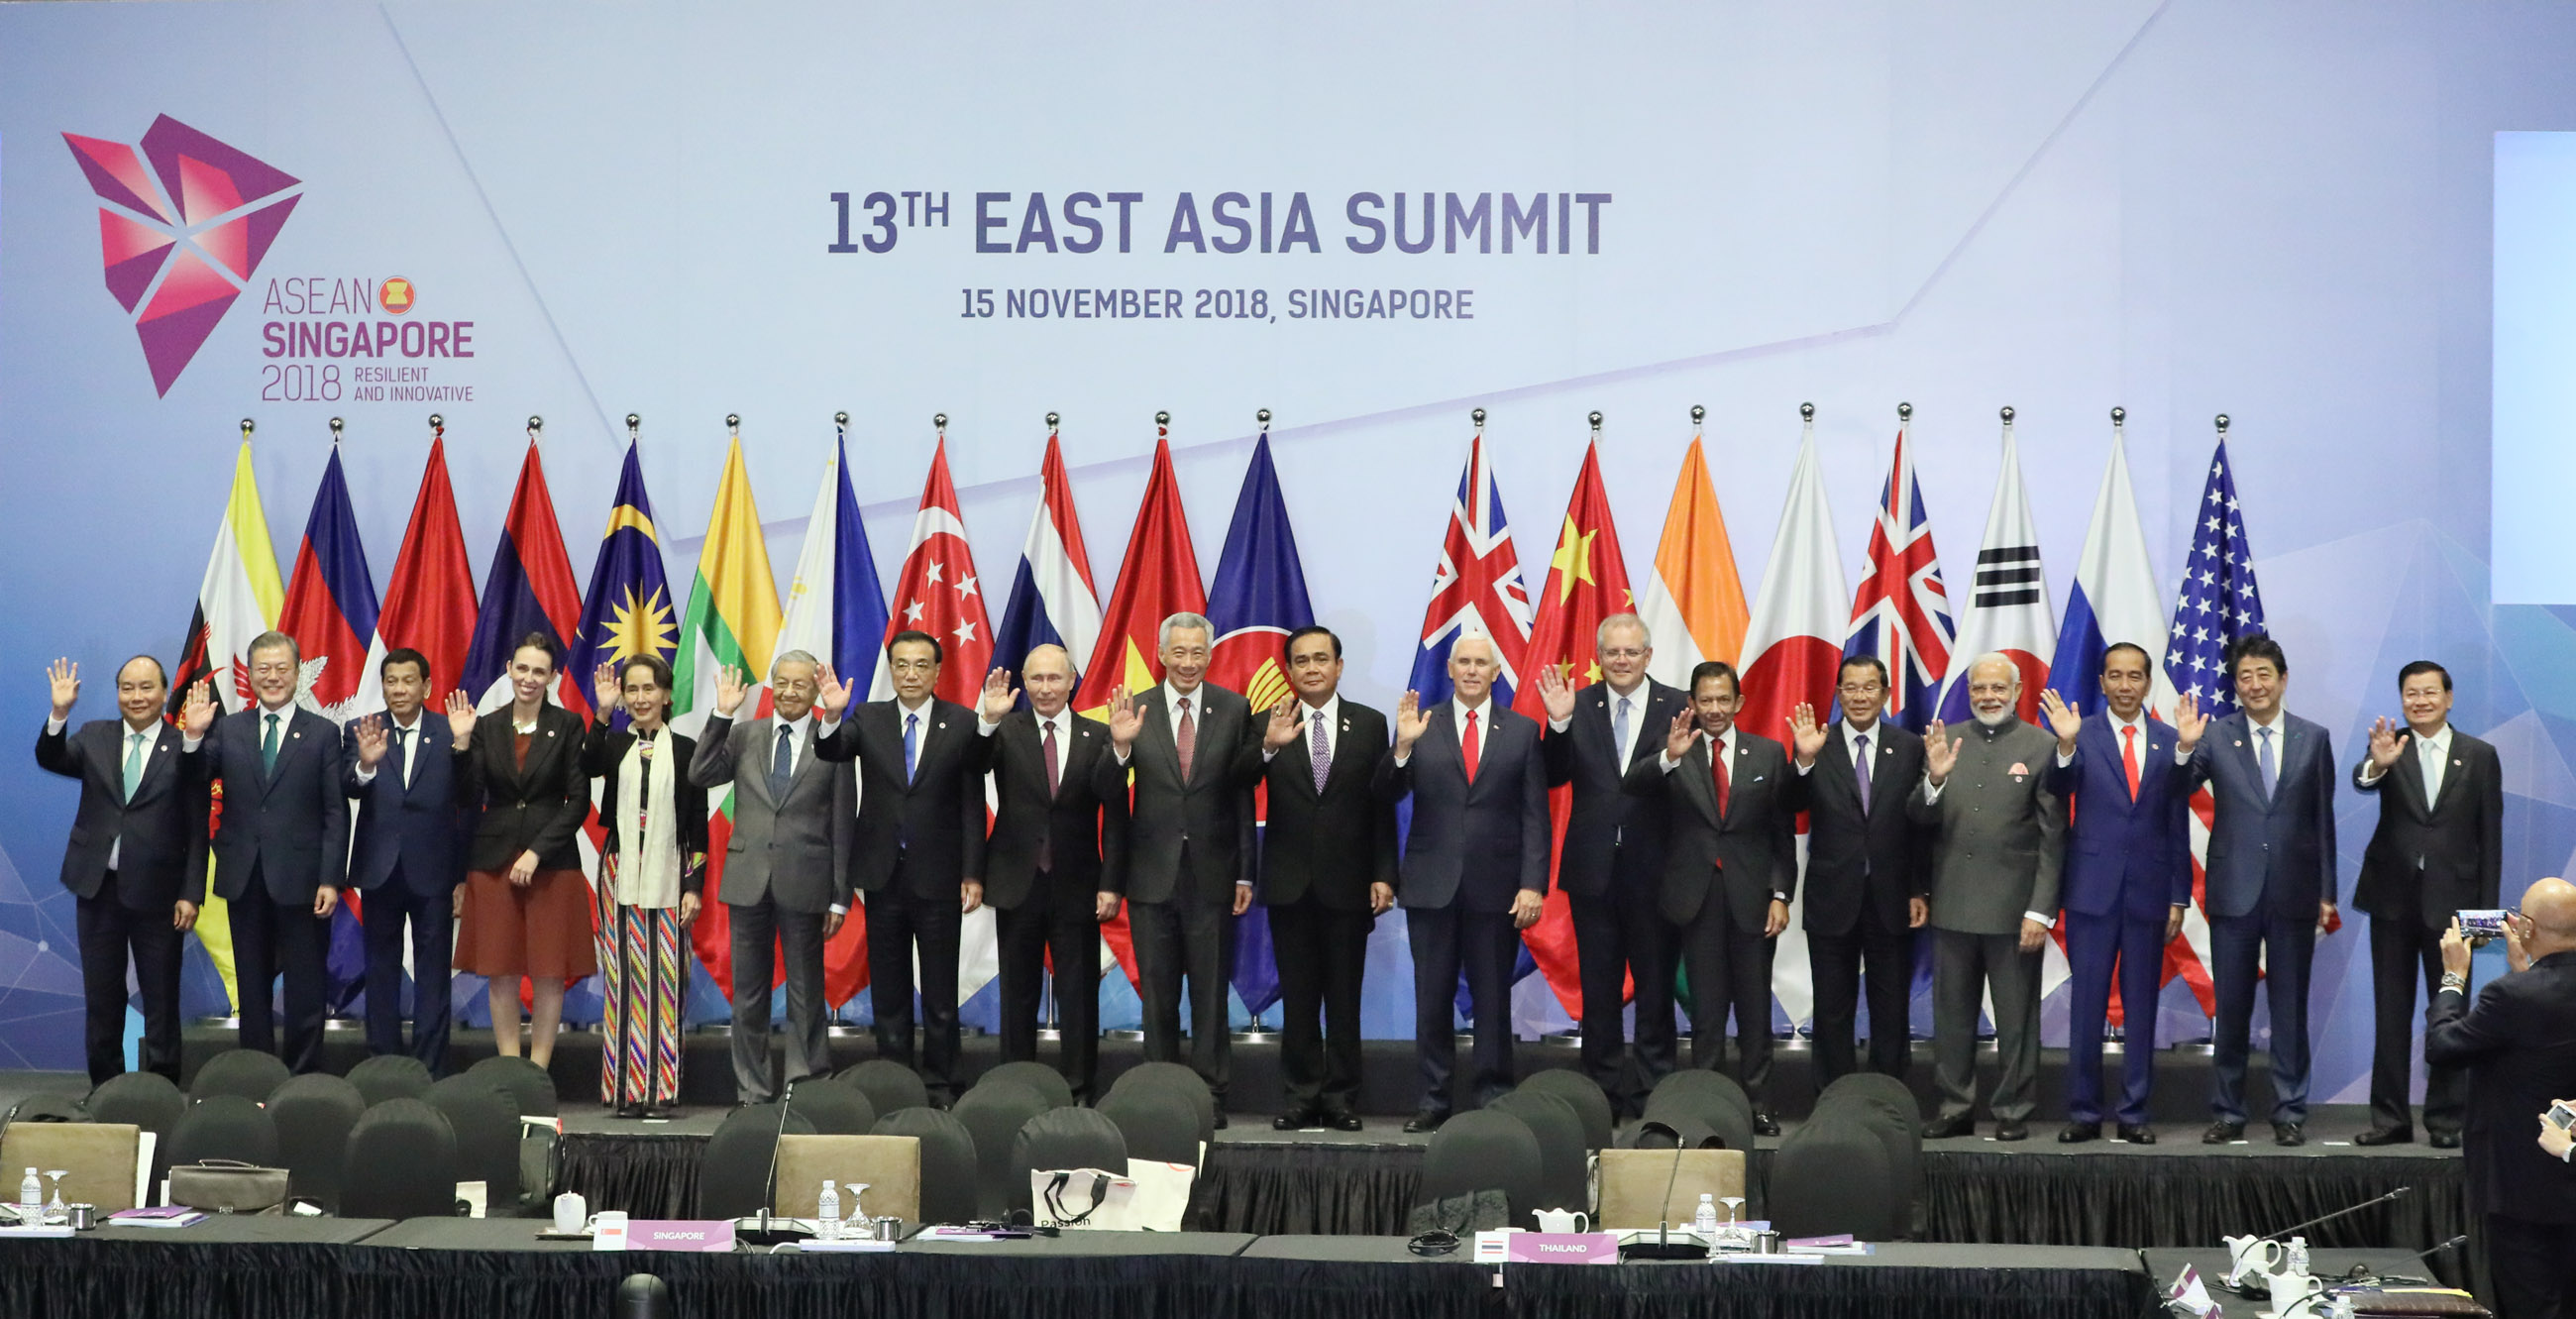 Photograph of the Prime Minister attending a photograph session at the East Asia Summit